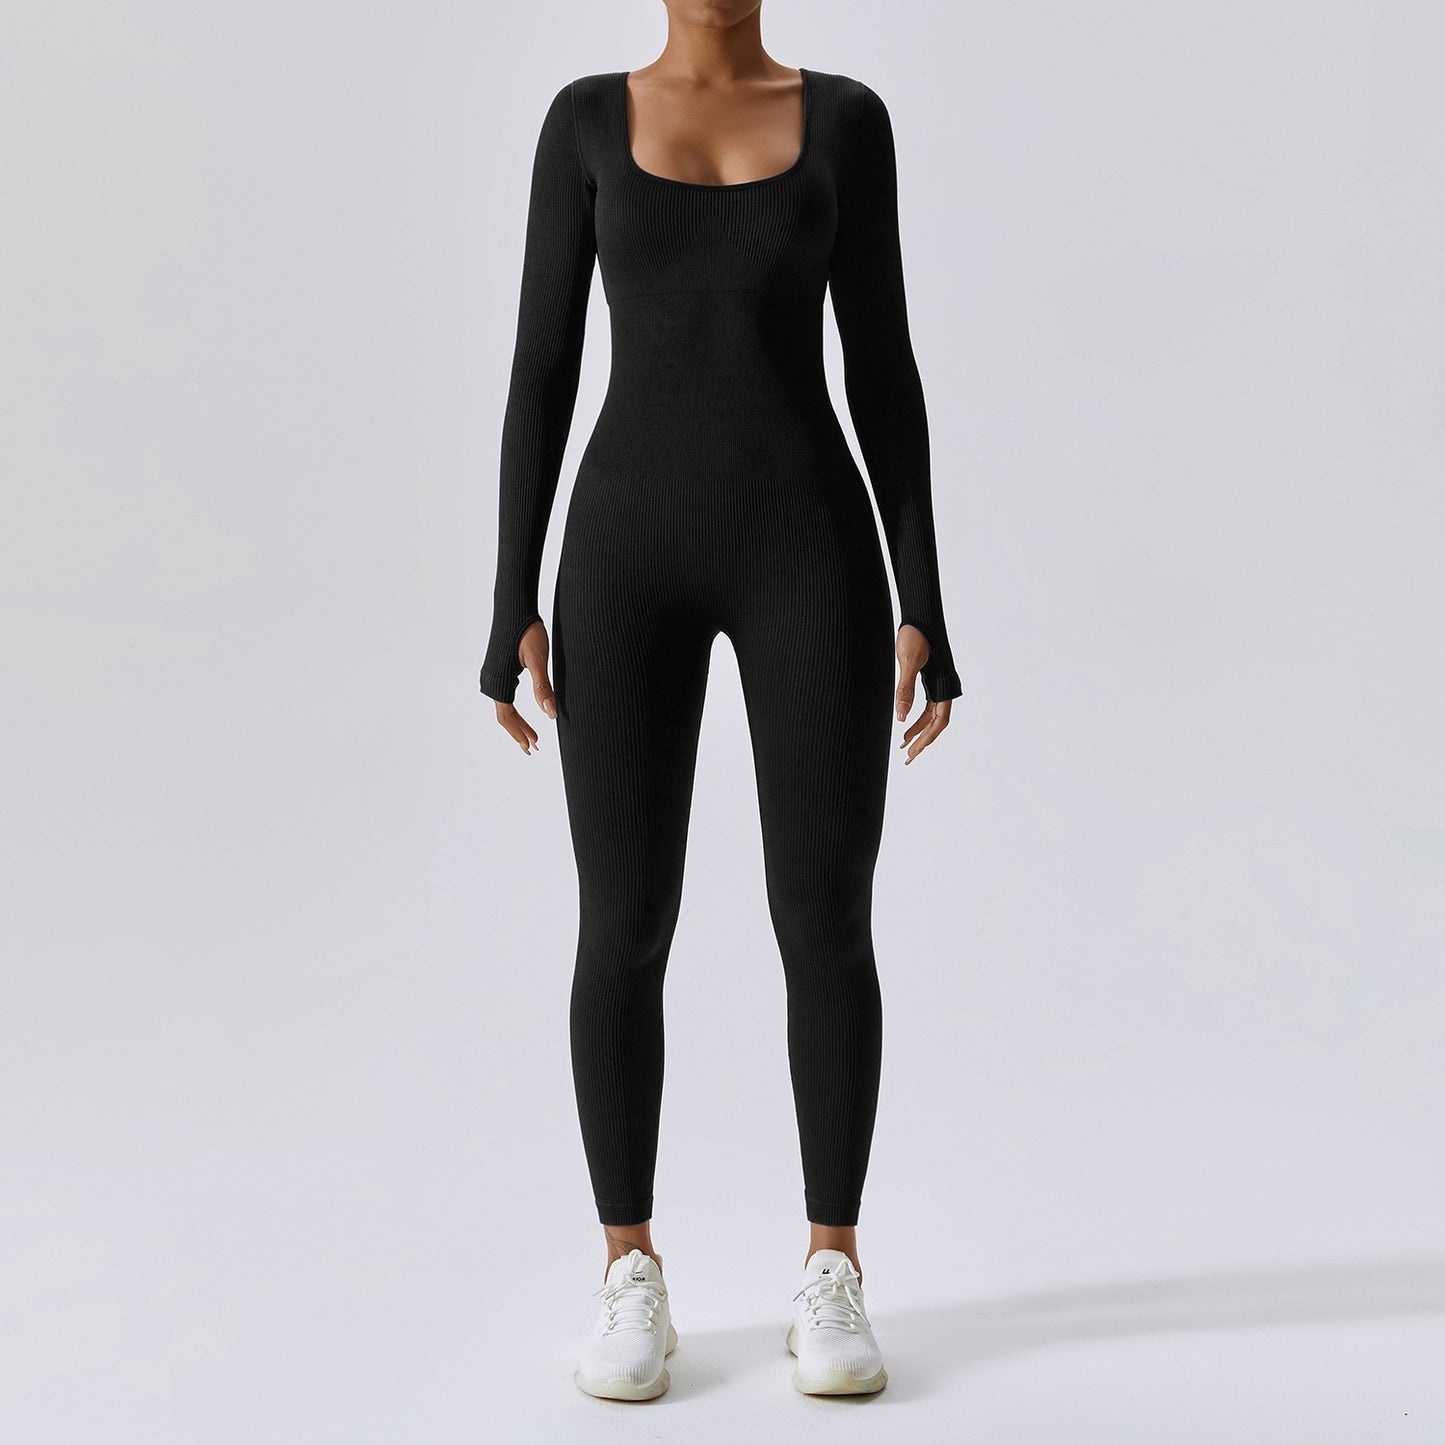 Seamless Yoga Suit Women&#39;s Bodysuit Spring Dance Fitness Clothes Gym Push Up Workout Bodysuit Tight Long-Sleeved Athletic Wear